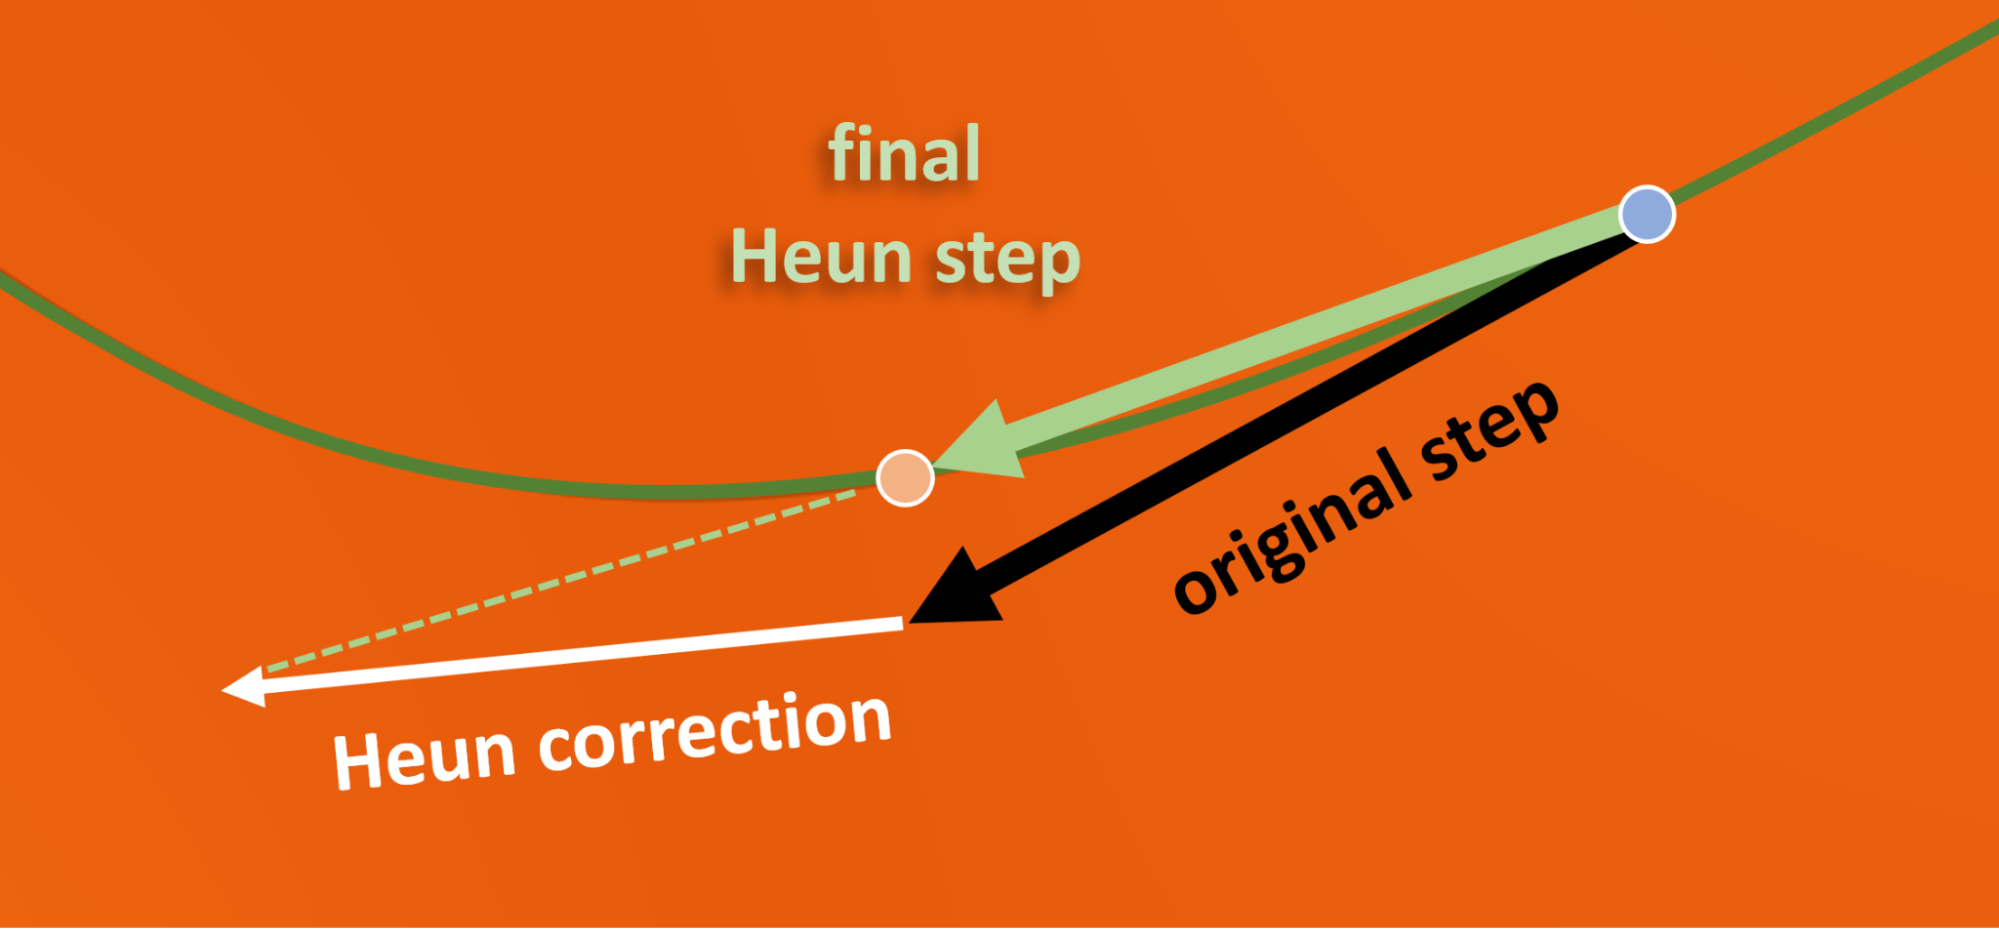 A diagram showing a curve and arrows that attempt to follow it. The first arrow lands away from the curve, and is followed by a second arrow that continues from there. A third arrow shows a half-way point between the base of the first arrow, and the tip of the last arrow. This indicates the corrected step.
